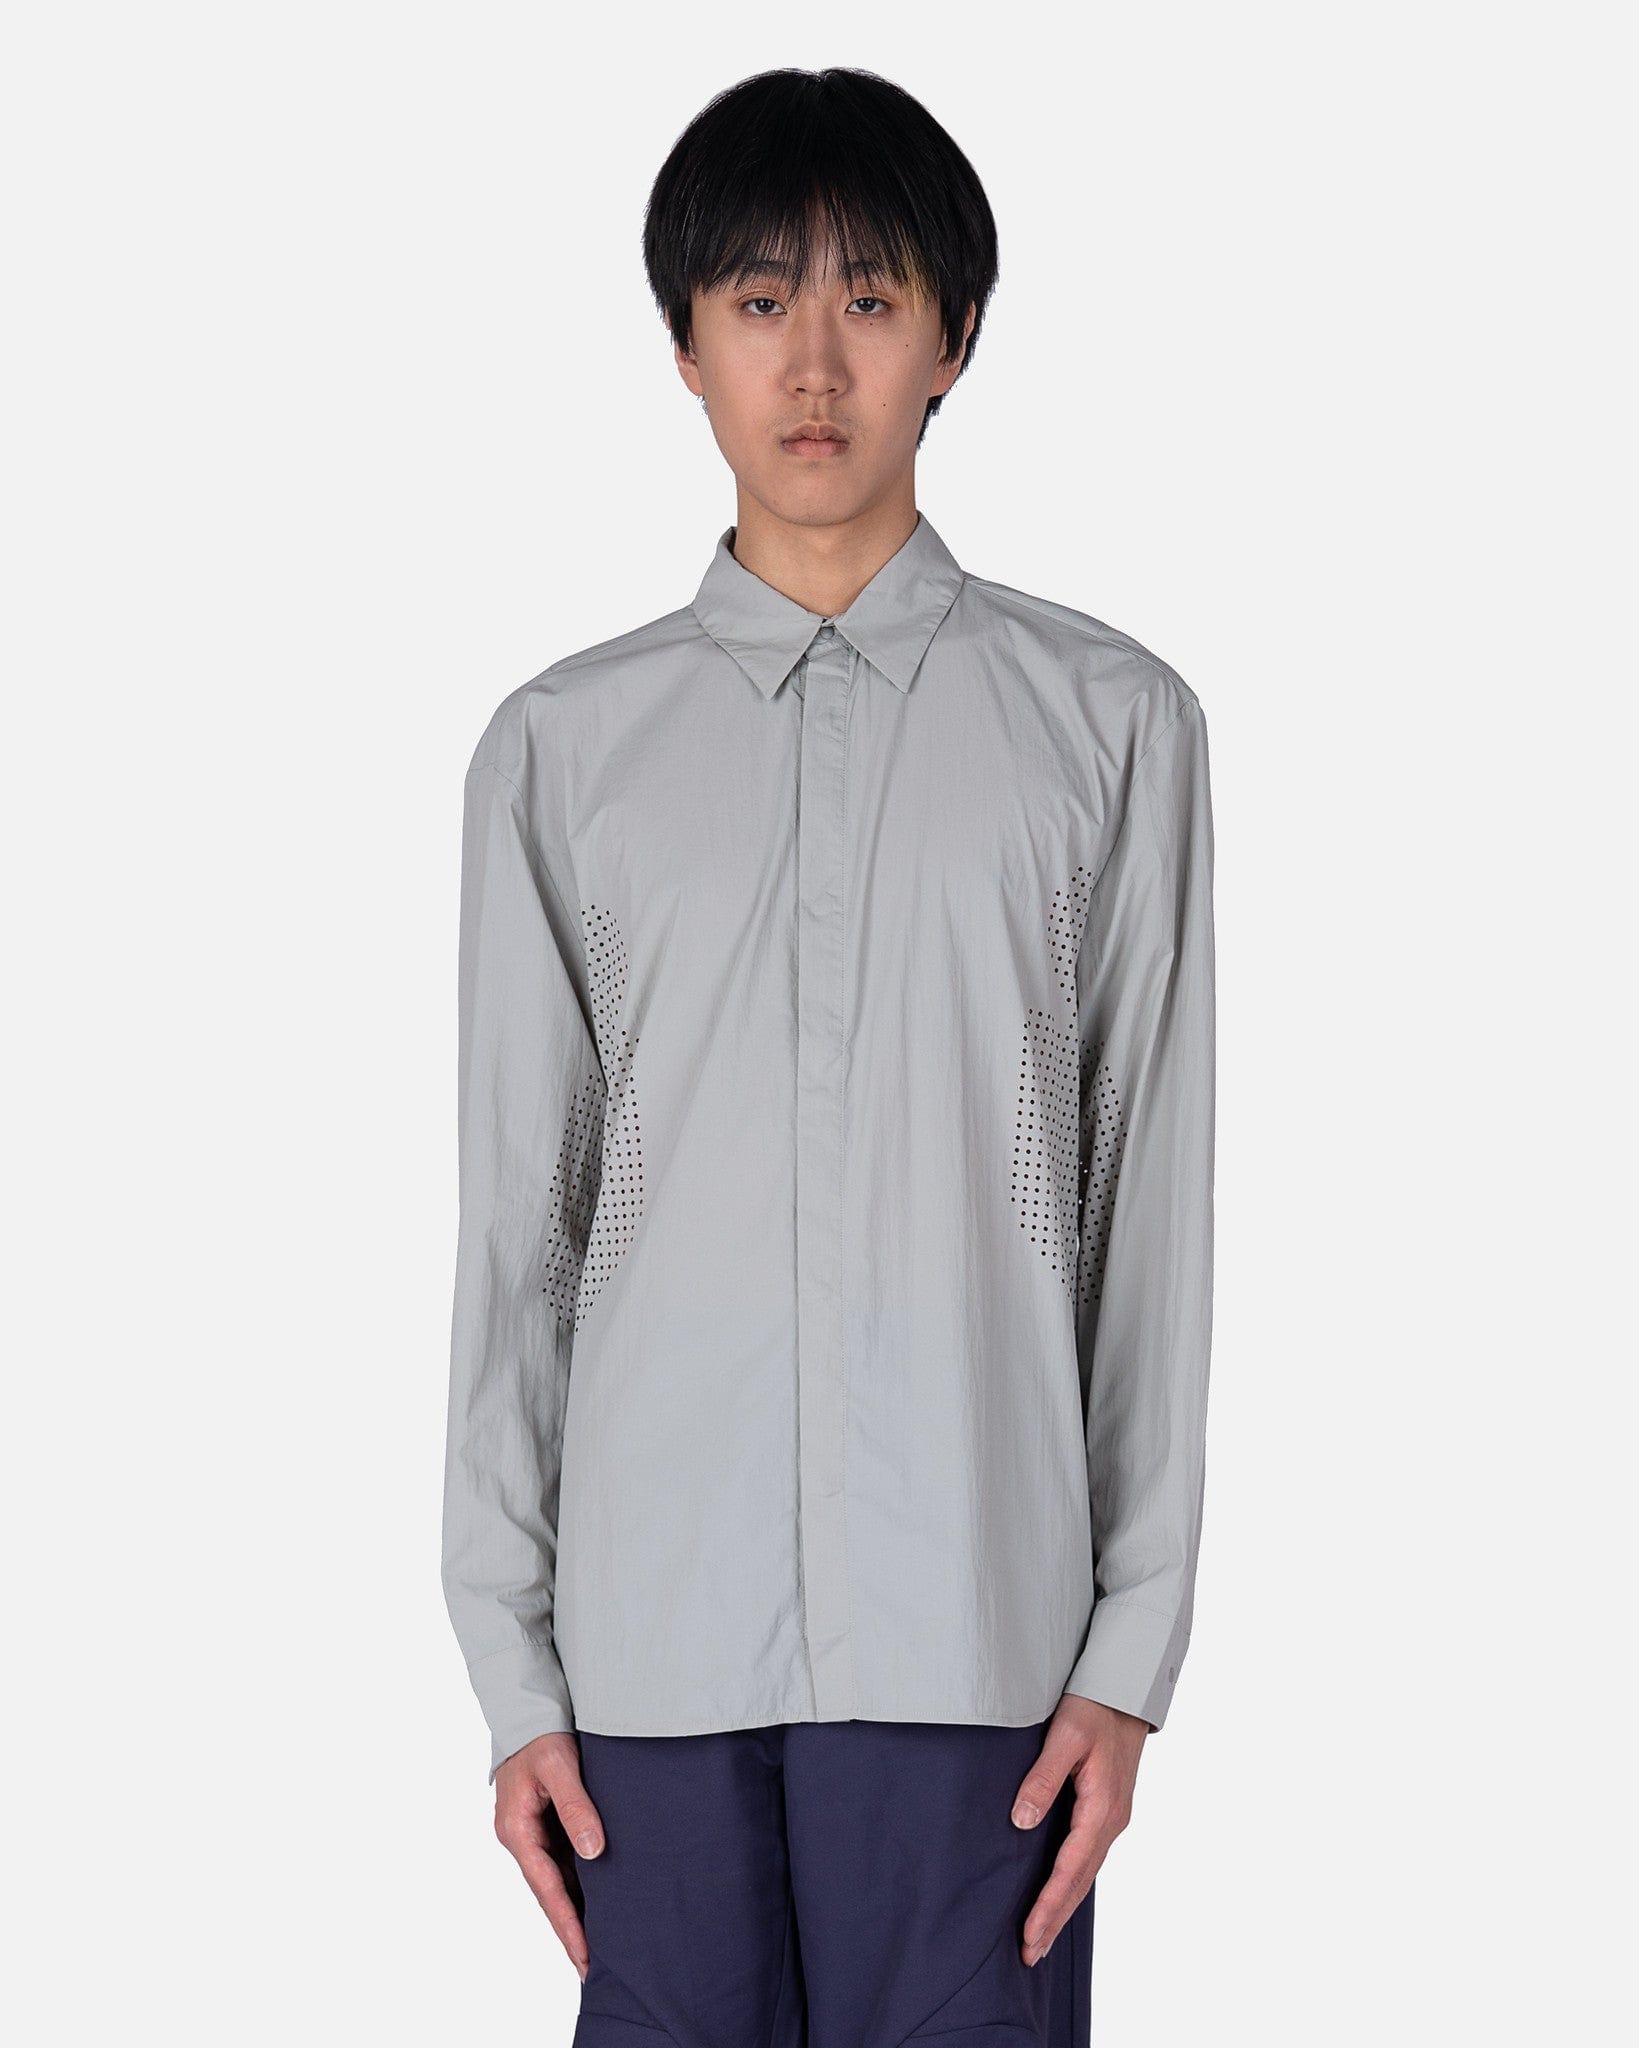 POST ARCHIVE FACTION (P.A.F) Men's Shirts 5.0 Shirt Right in Light Grey